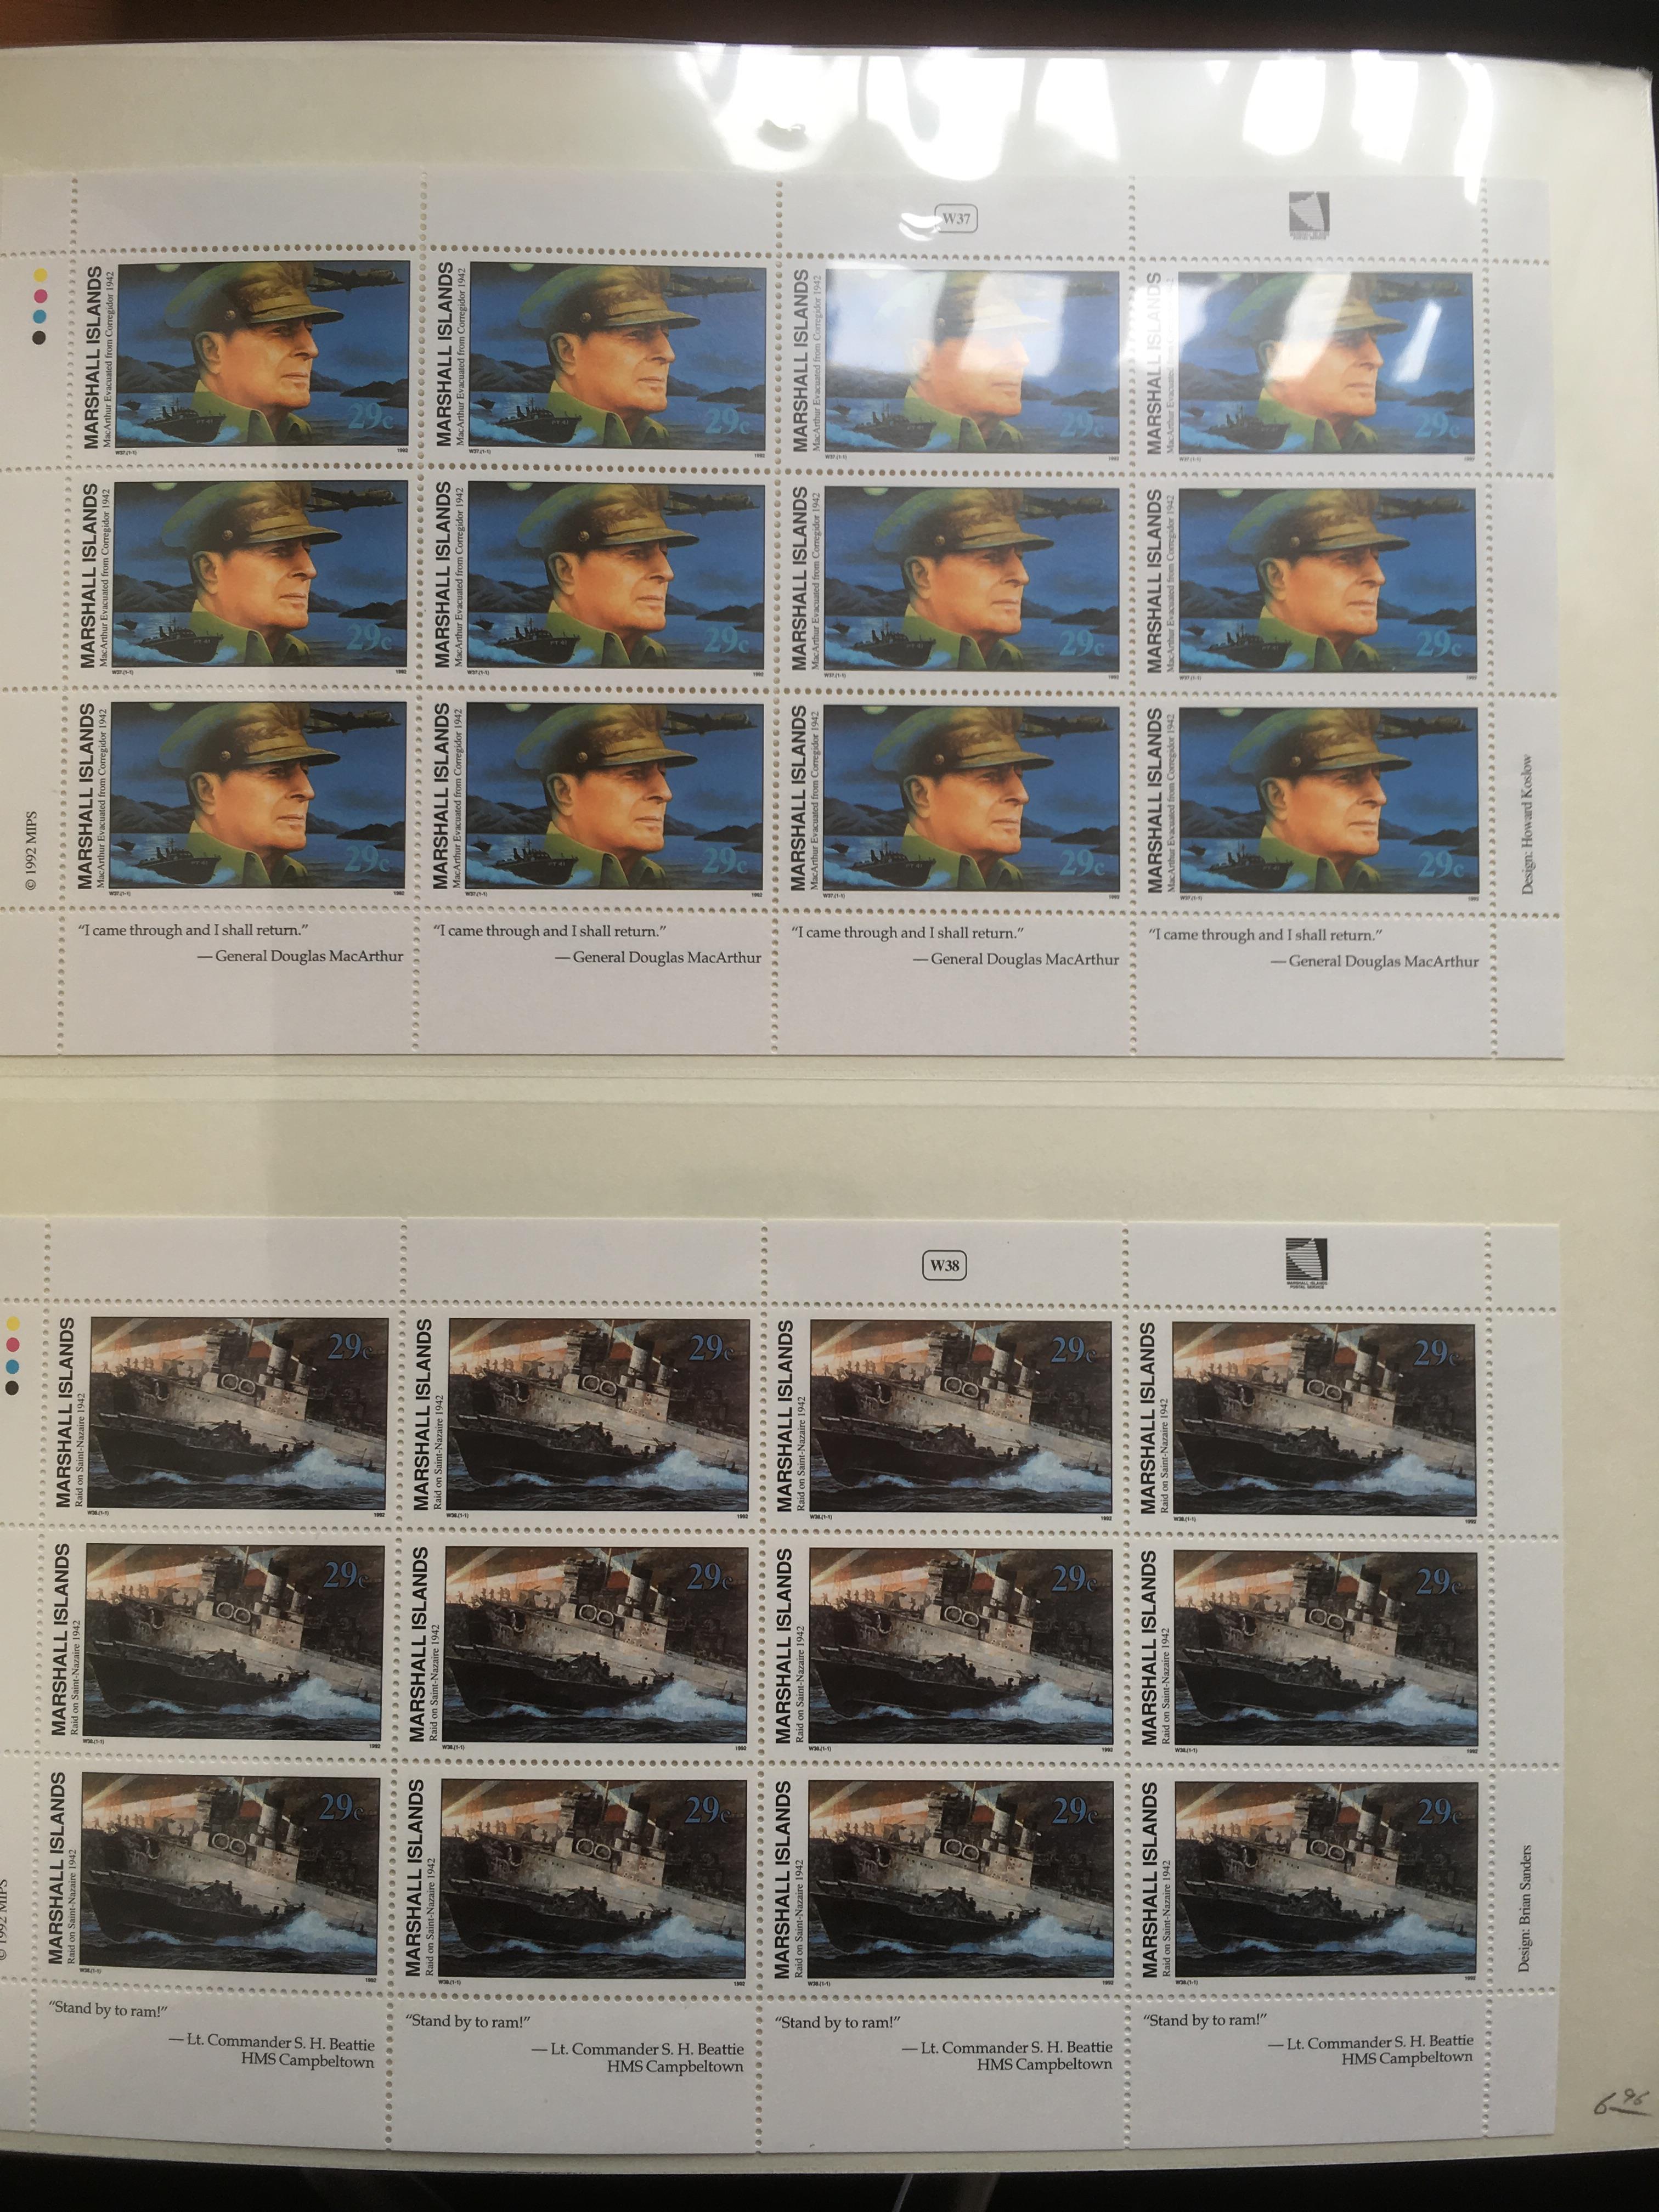 MARSHALL ISLANDS: 1994-9 MNH COLLECTION IN LINDER HINGELESS ALBUM AND ANOTHER SIMILAR ALBUM WITH - Image 7 of 16